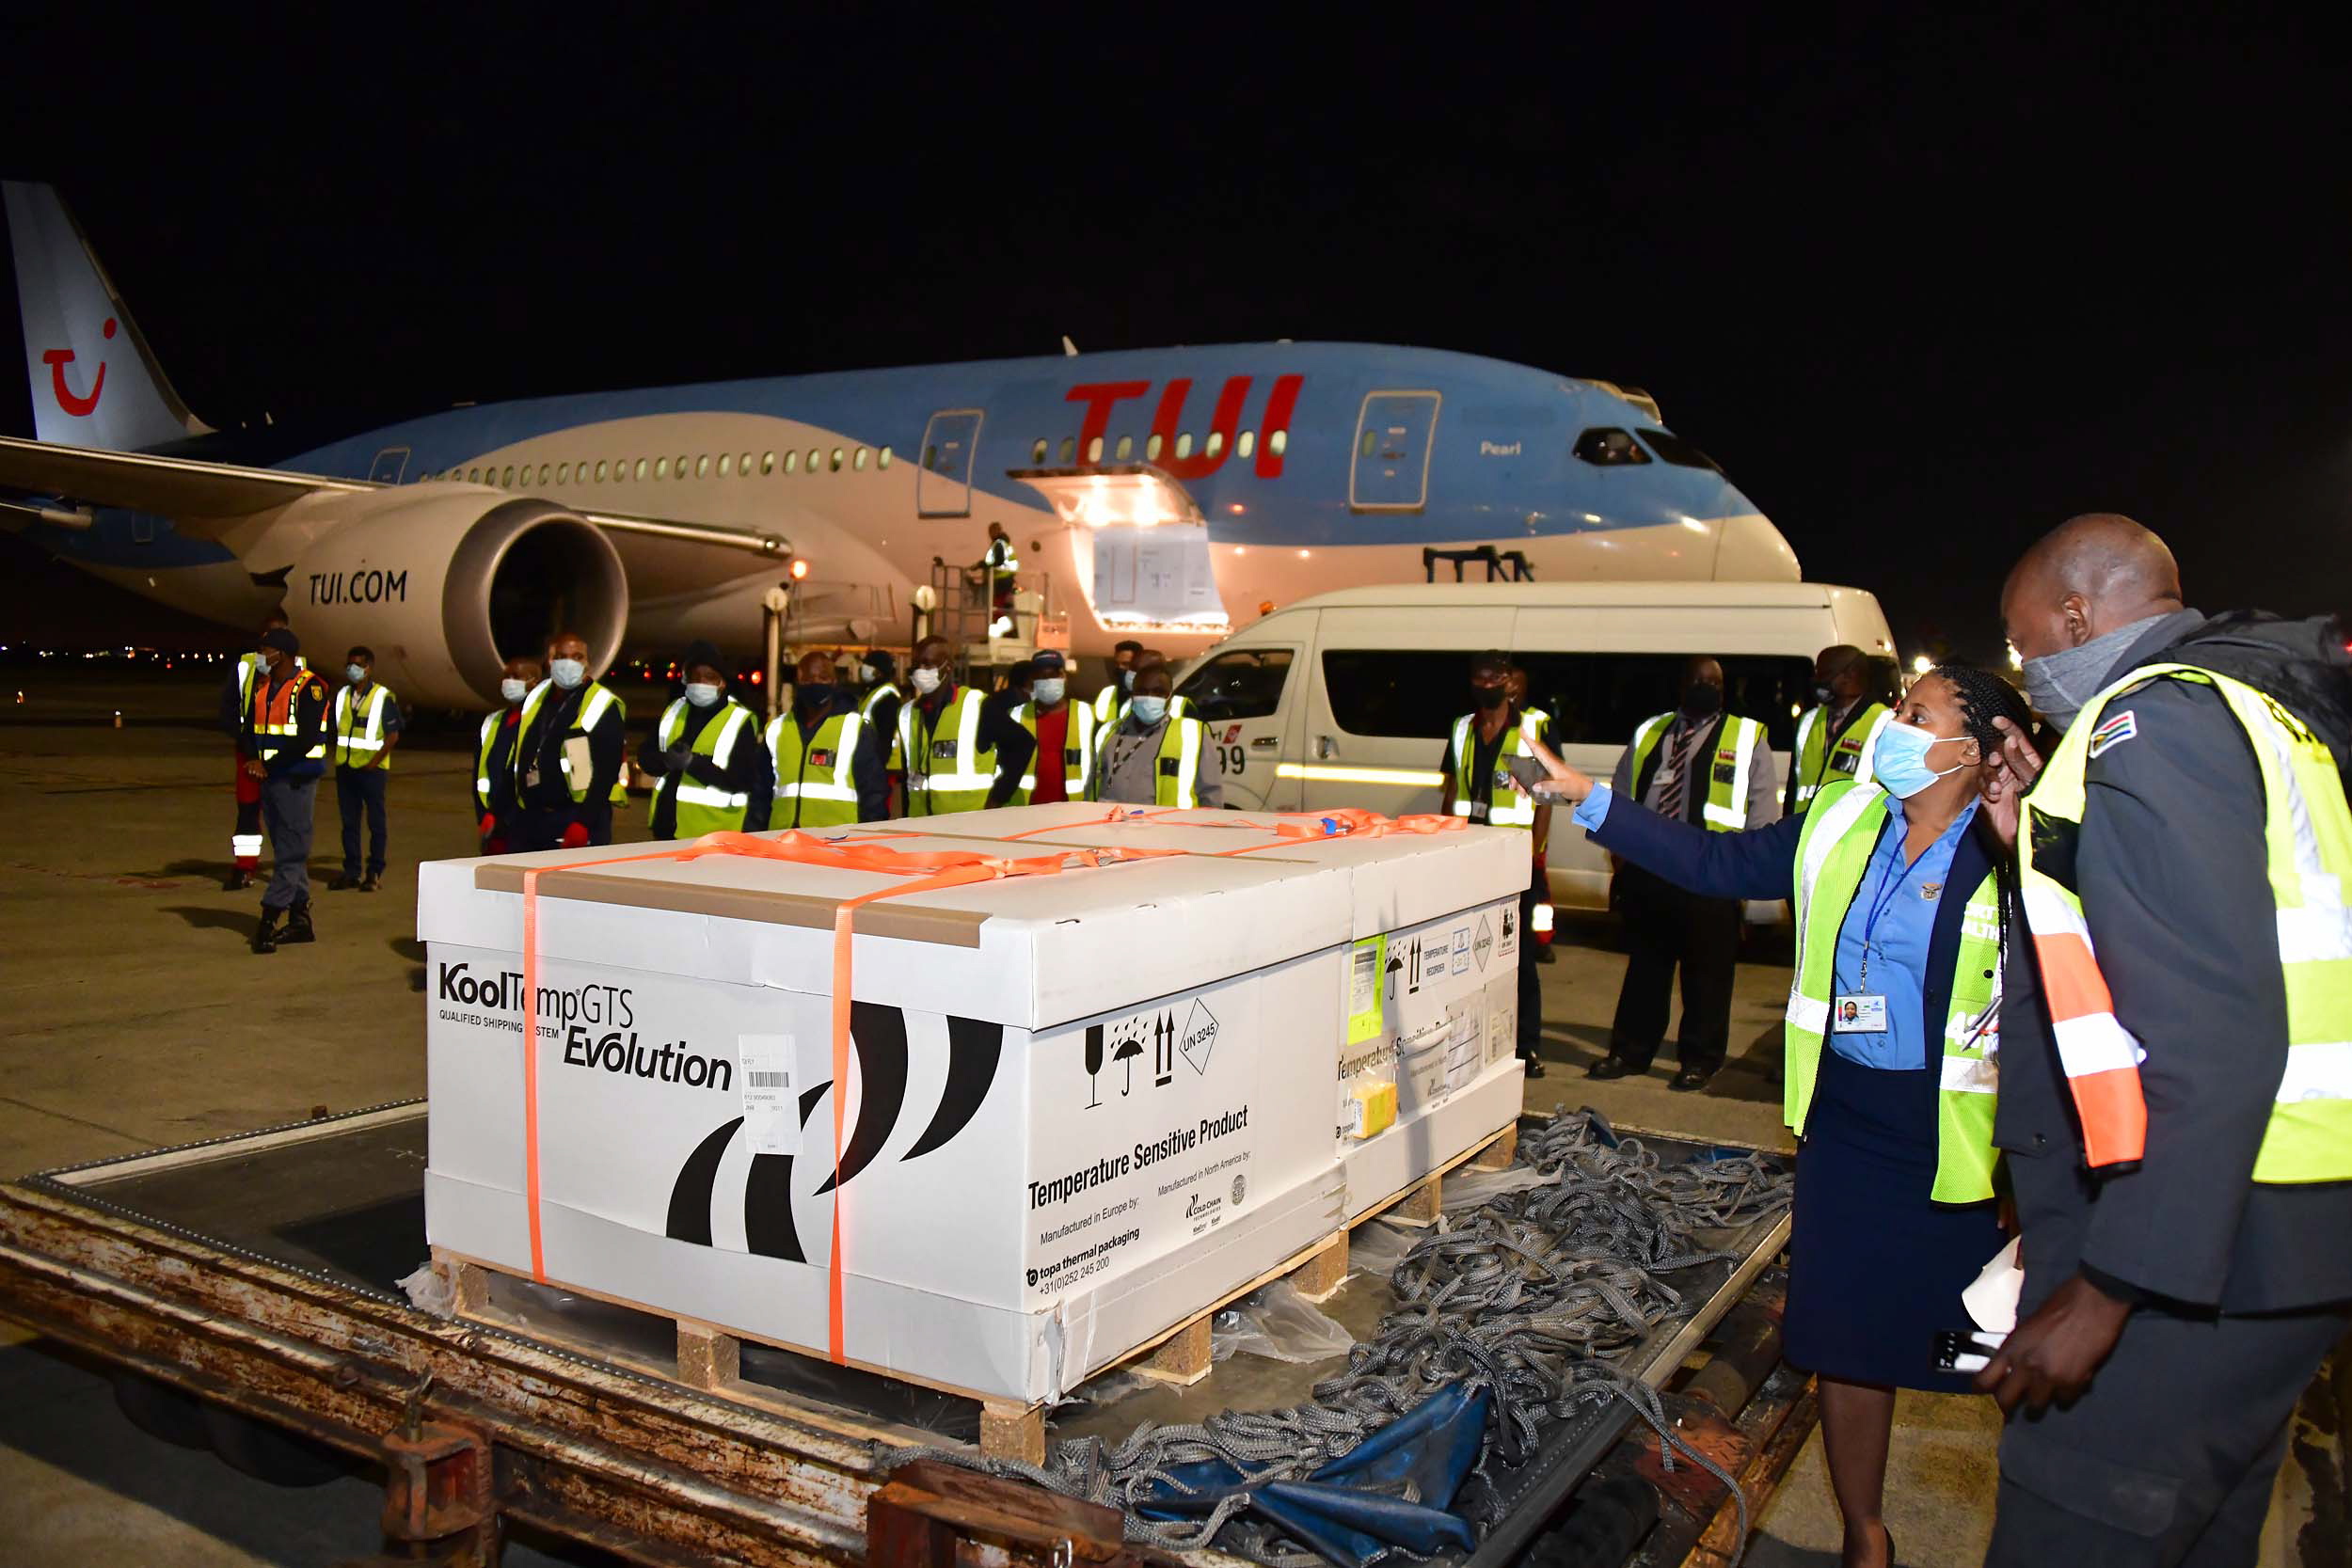 epa09017355 A handout photo made available by South Africa's Government Information Services (GCIS) shows the first delivery of the Johnson & Johnson COVID-19 vaccine arriving at the O R Tambo International Airport in Johannesburg, South Africa, 17 February 2021. The vaccine has been approved by South African Health Products Authority and is expected to only be given to health care workers. The consignment will be moved to a secure facility before being distributed overnight to the various vaccine centers in all provinces.  EPA/BABA JIYANE/GCIS HANDOUT  HANDOUT EDITORIAL USE ONLY/NO SALES